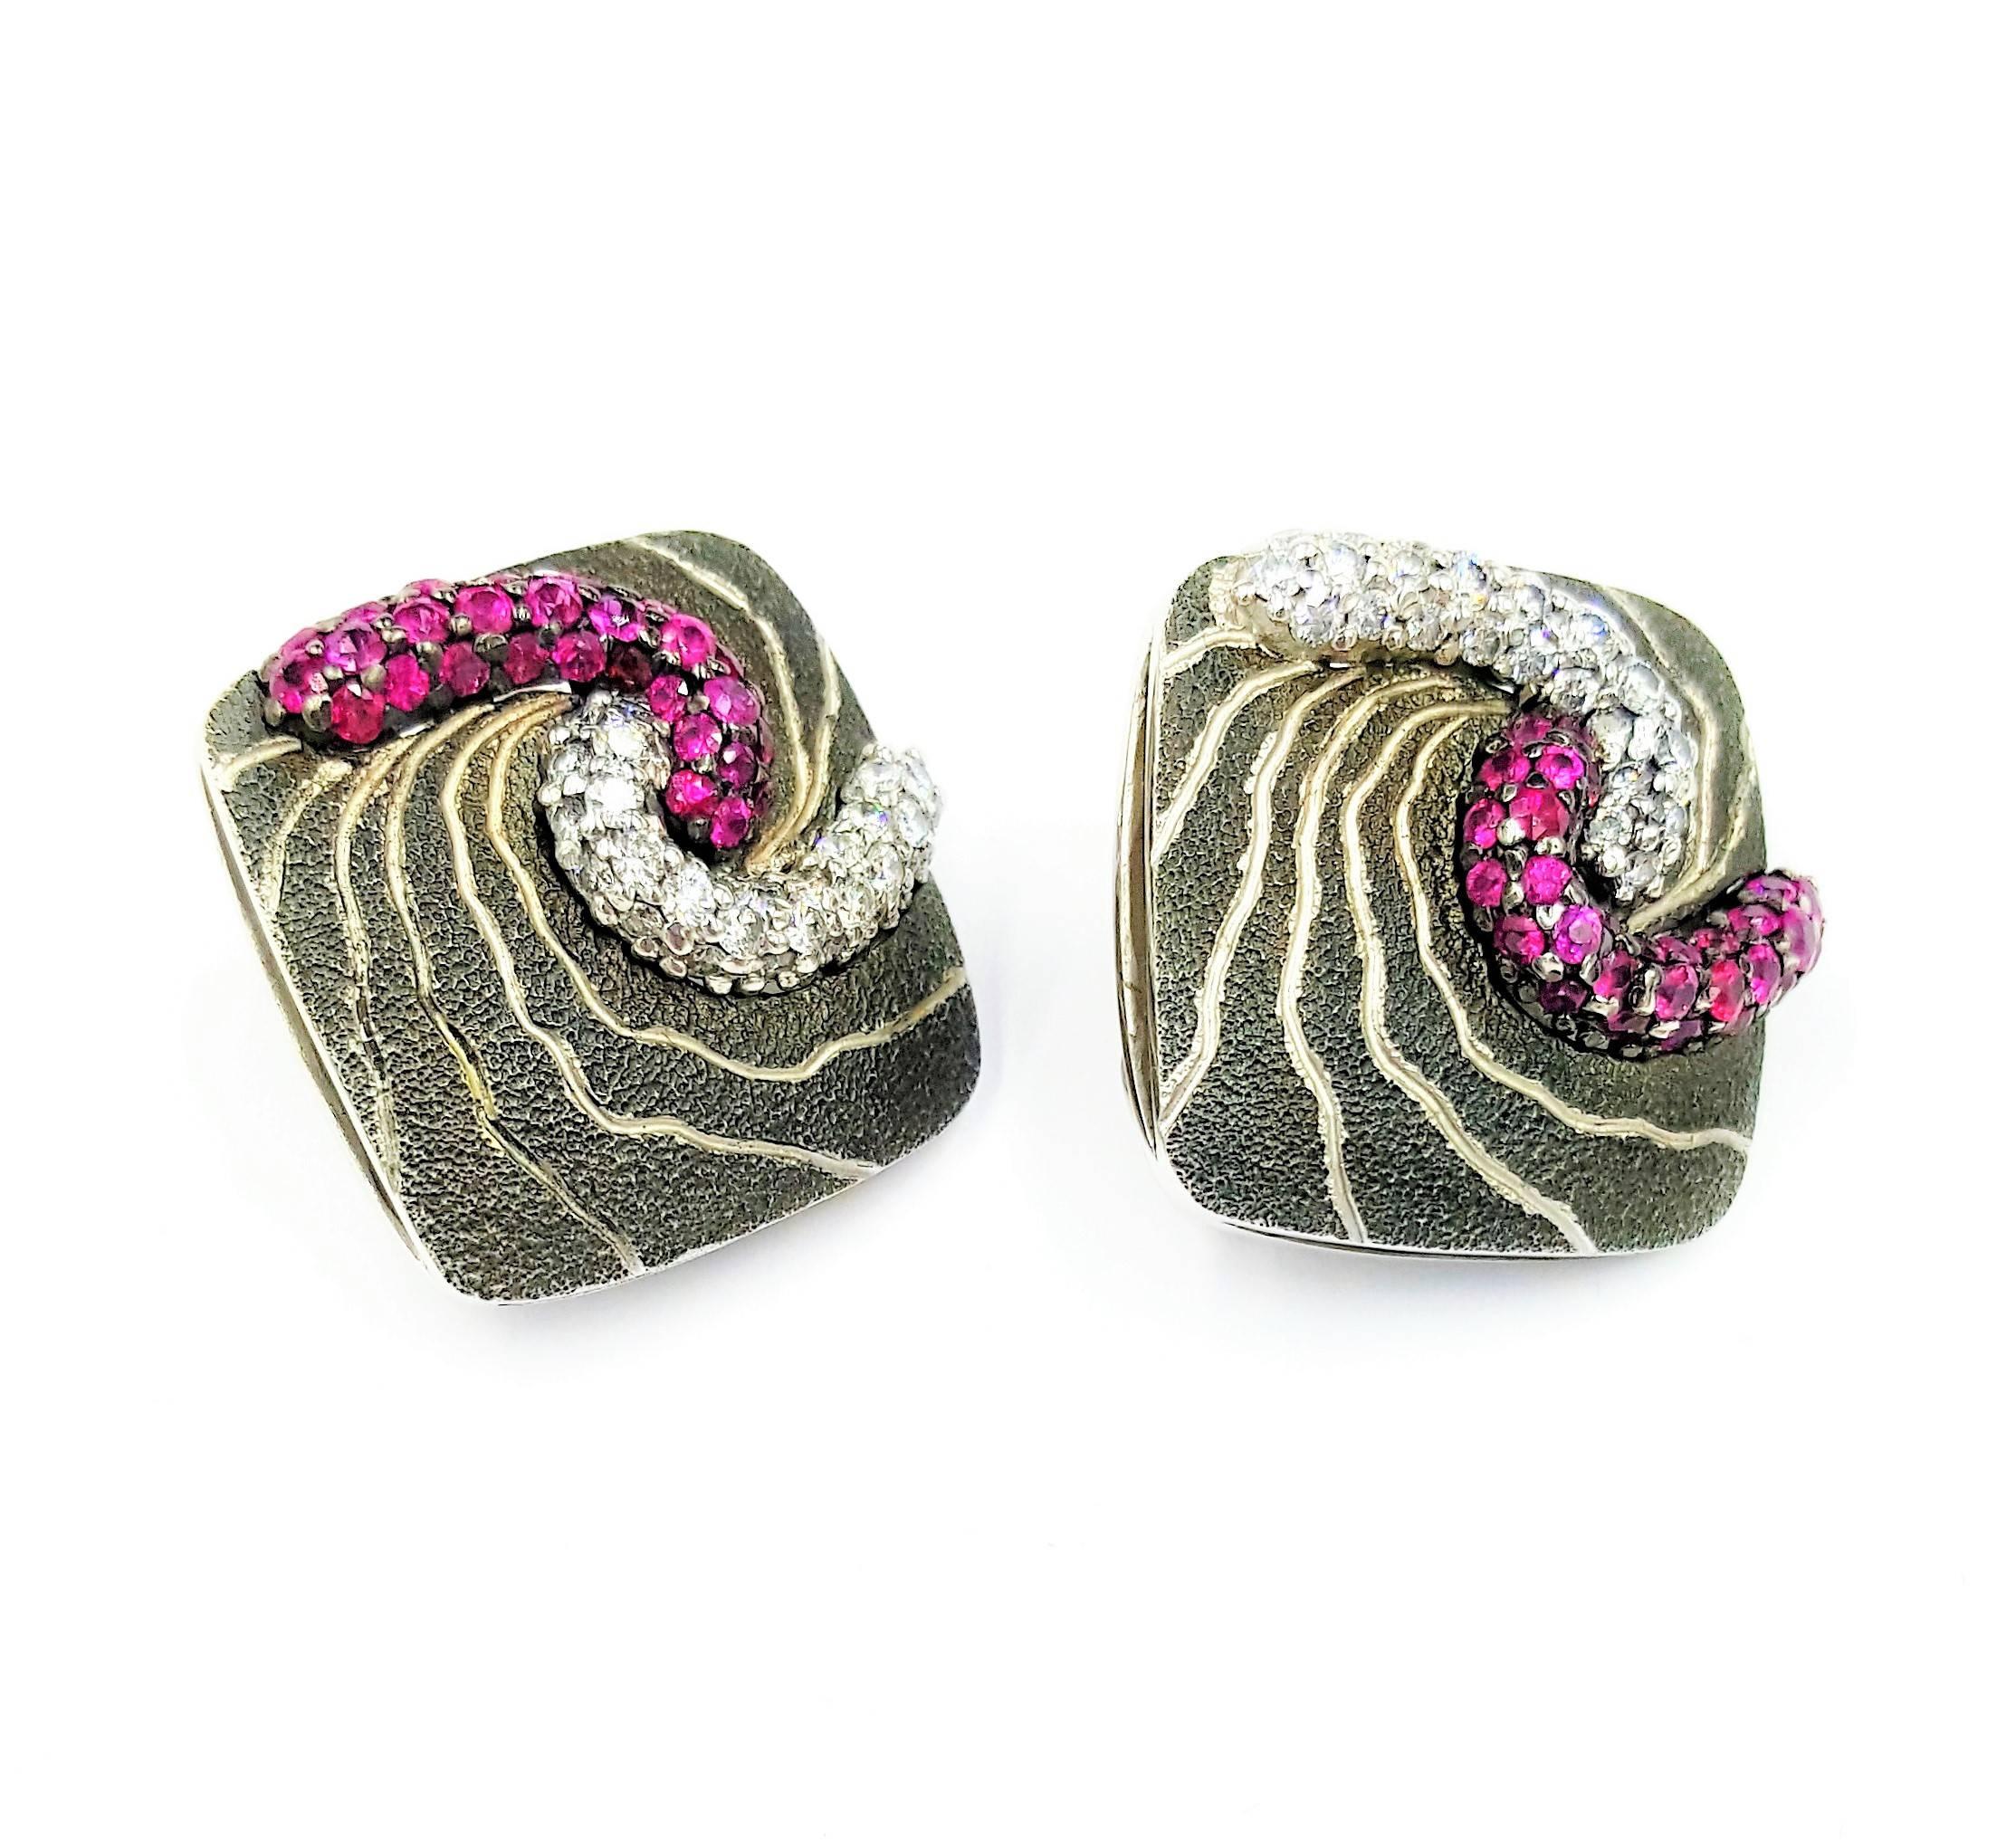 Designer Alex Soldier Swirls of the Earth featuring 1.00 carat of Rubies and 1 carat of VS clarity and G-H color diamonds. These earrings definitely catch the attention of any onlooker and are as gorgeous as they are peculiar. They are .75 inches